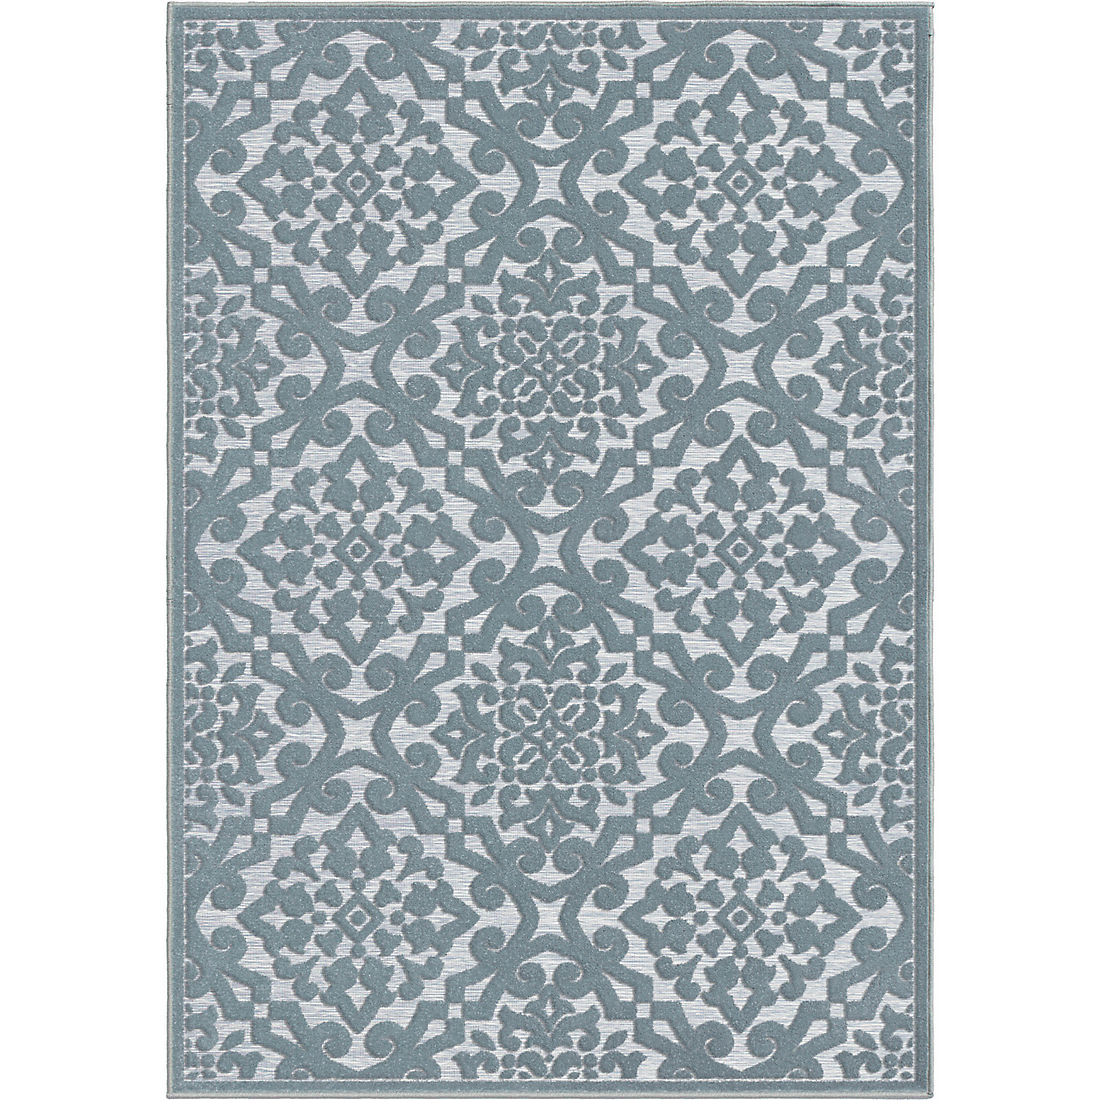 Orian Rugs 9 X 13 Boucle Indoor Outdoor Area Rug Lansing Harbor Blue Bj S Whole Club